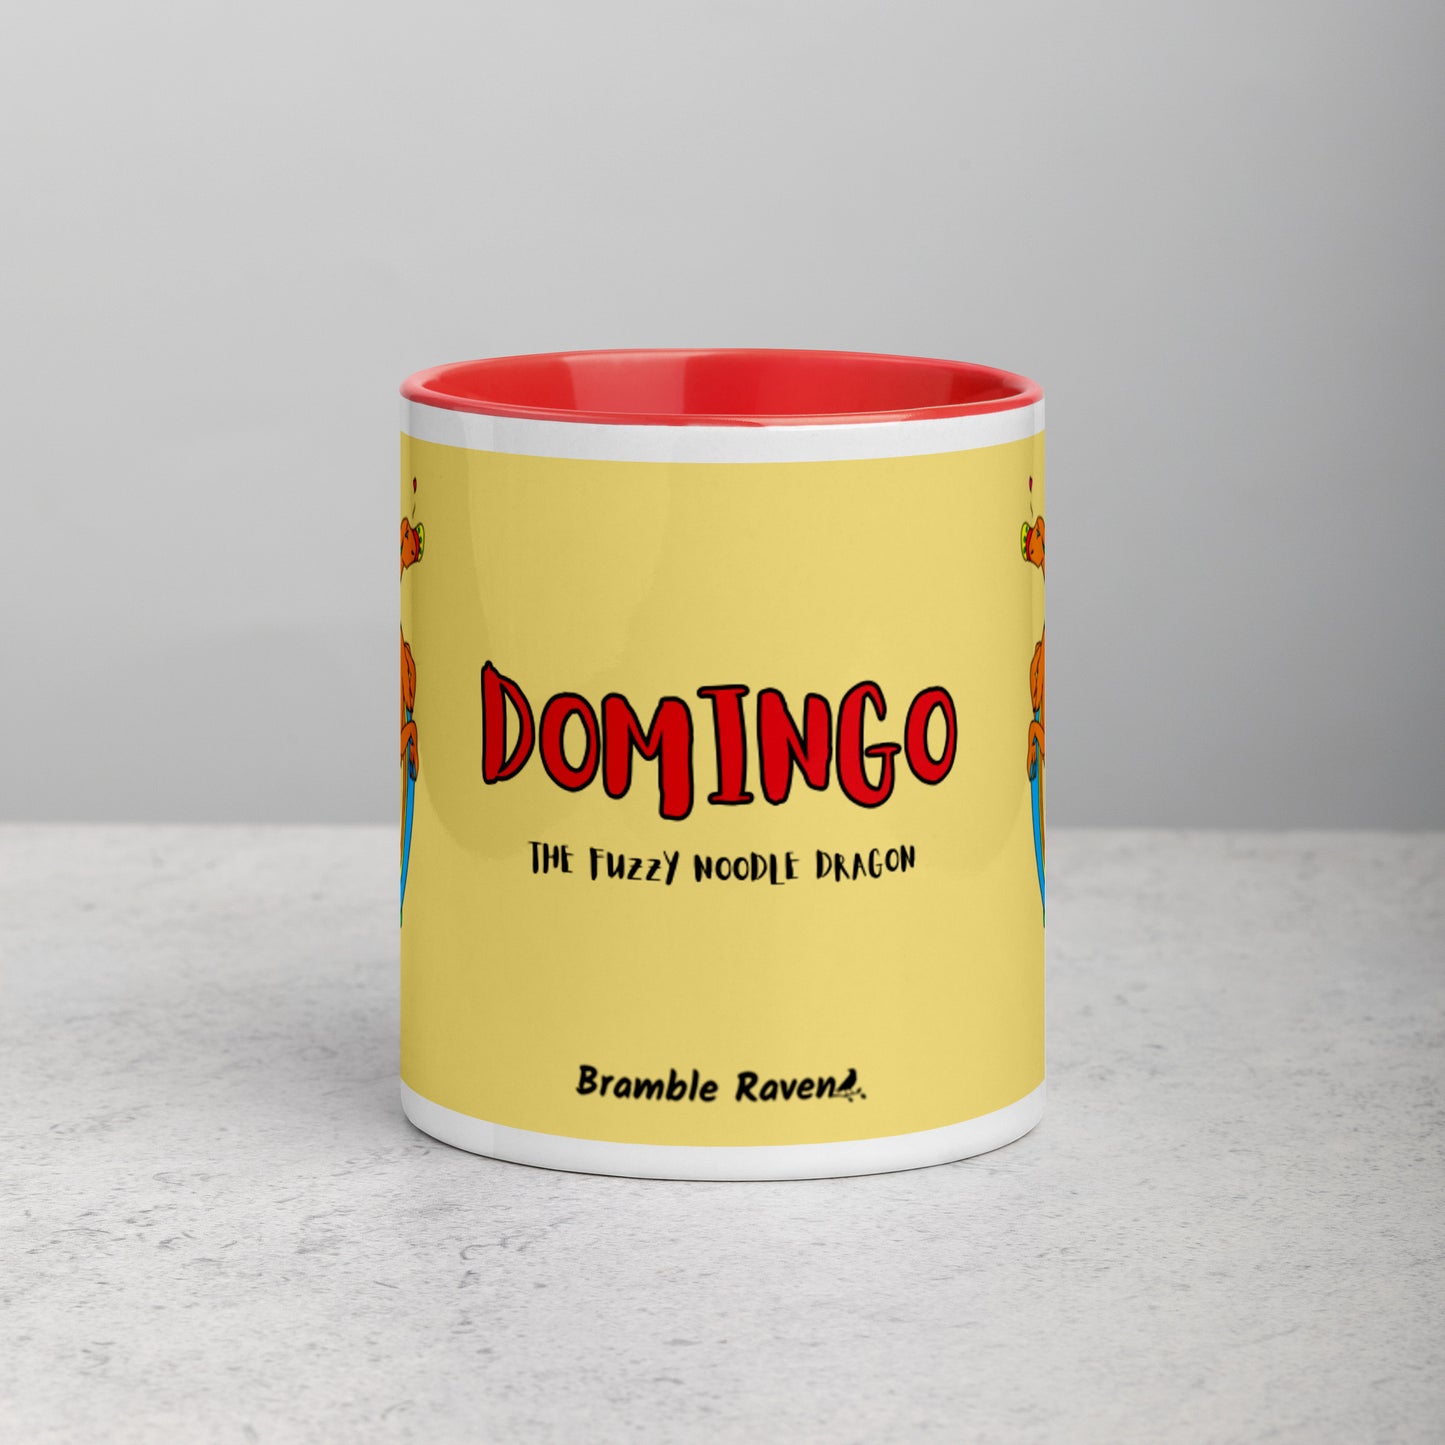 11 ounce white ceramic mug featuring a double-sided image of Domingo the Fuzzy Noodle Dragon against a light yellow background. Red inside and handle color. Shown on tabletop. Front view shows Domingo the Fuzzy Noodle Dragon text and Bramble Raven logo.